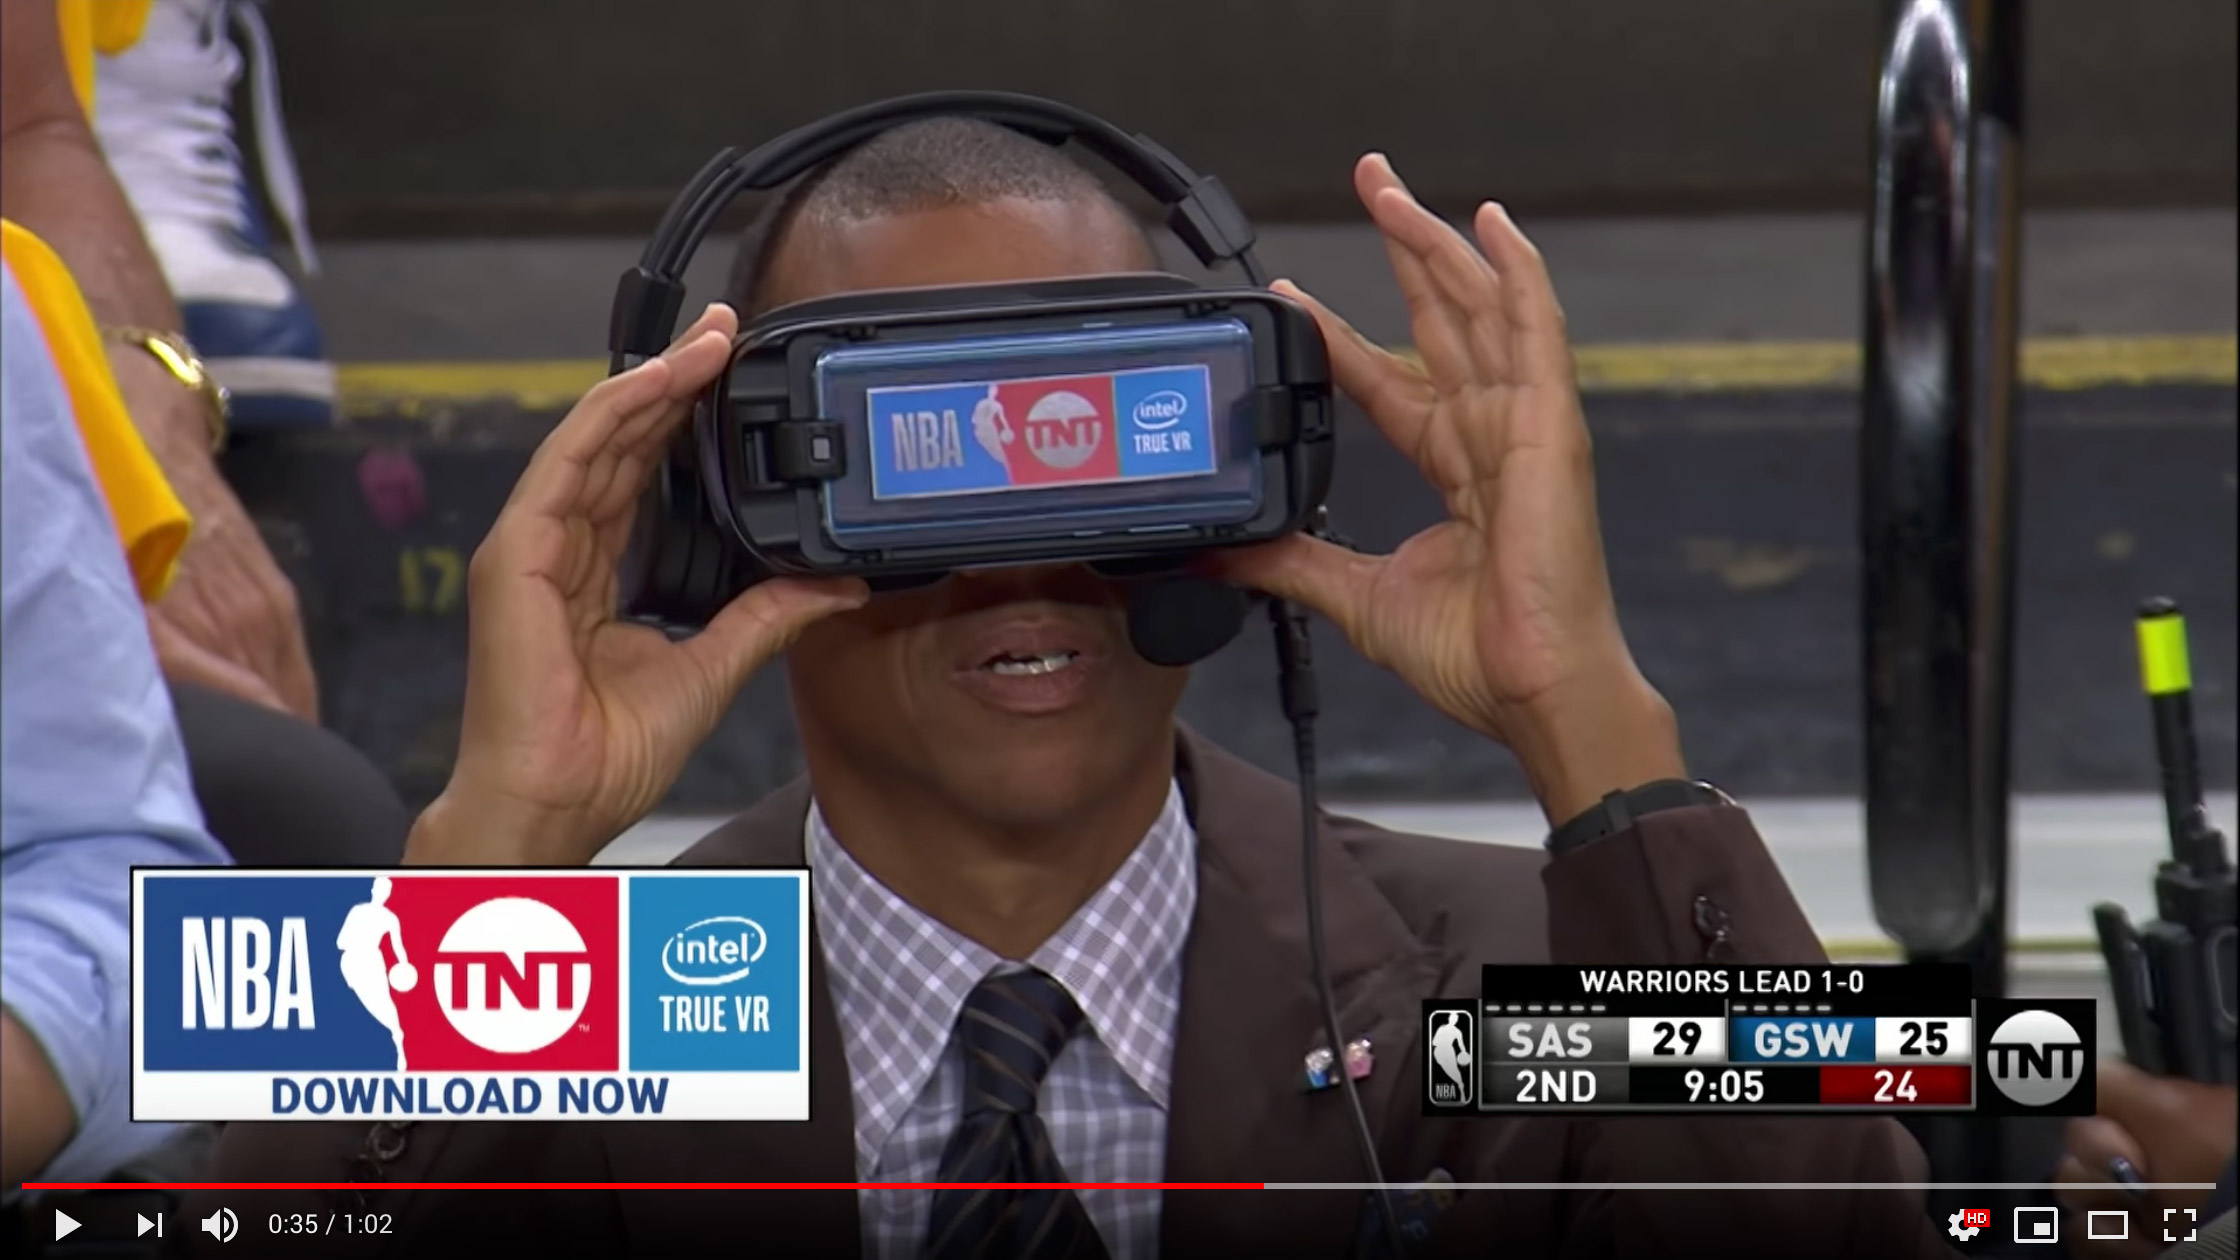 Reggie Miller checking out the virtual goods